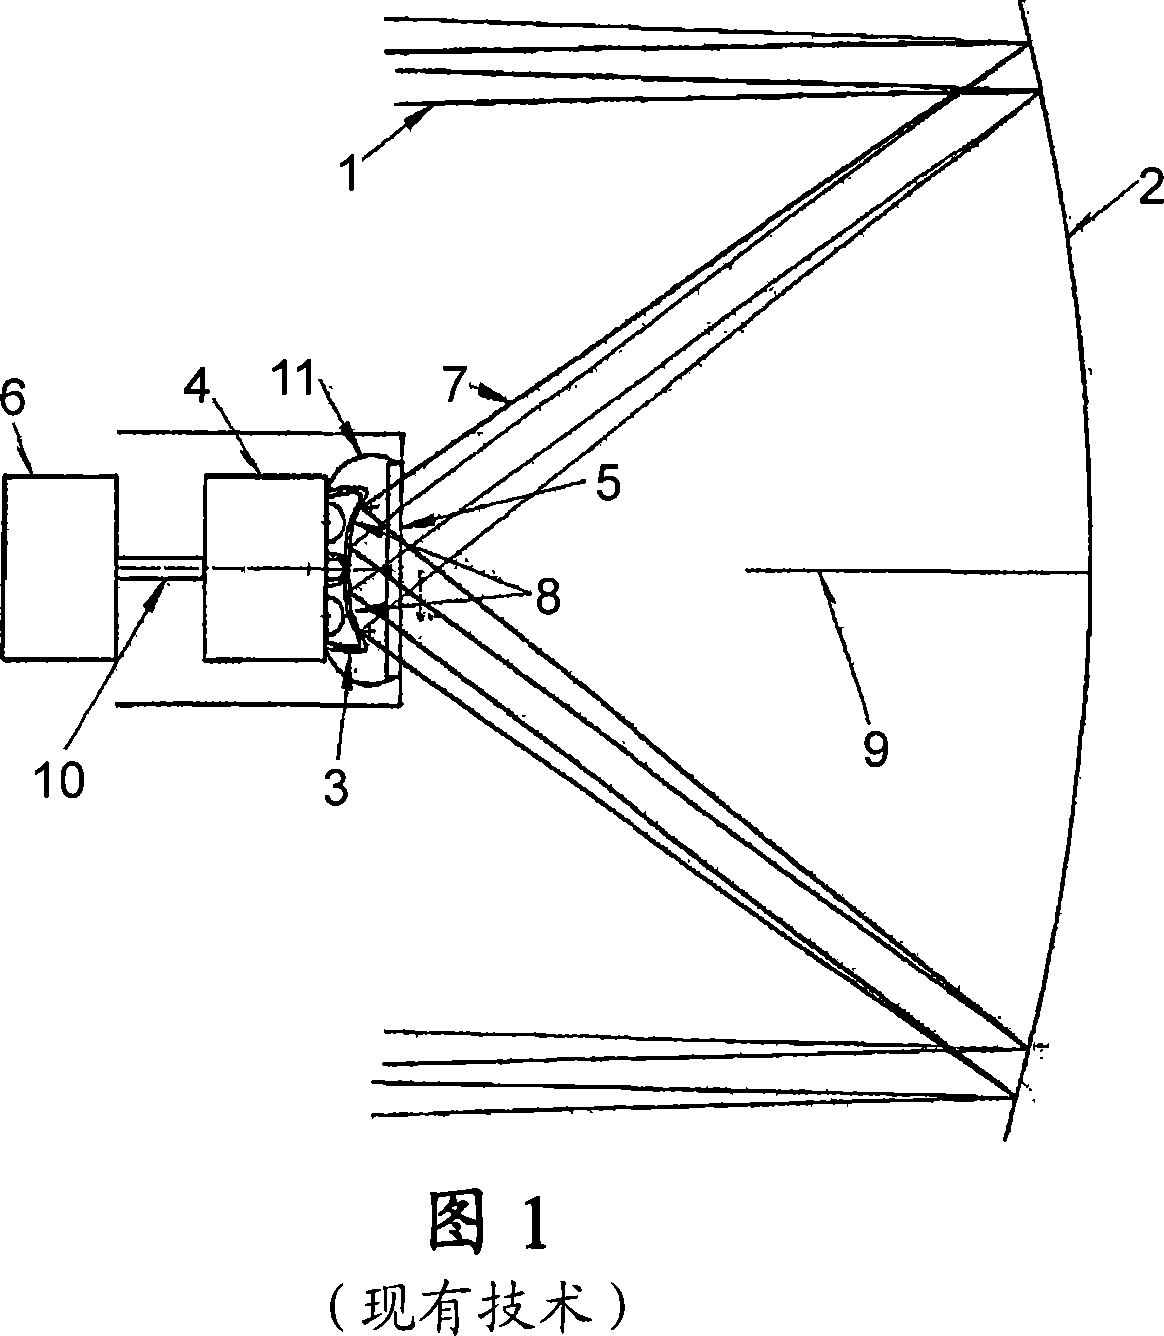 Device and method for collecting solar energy